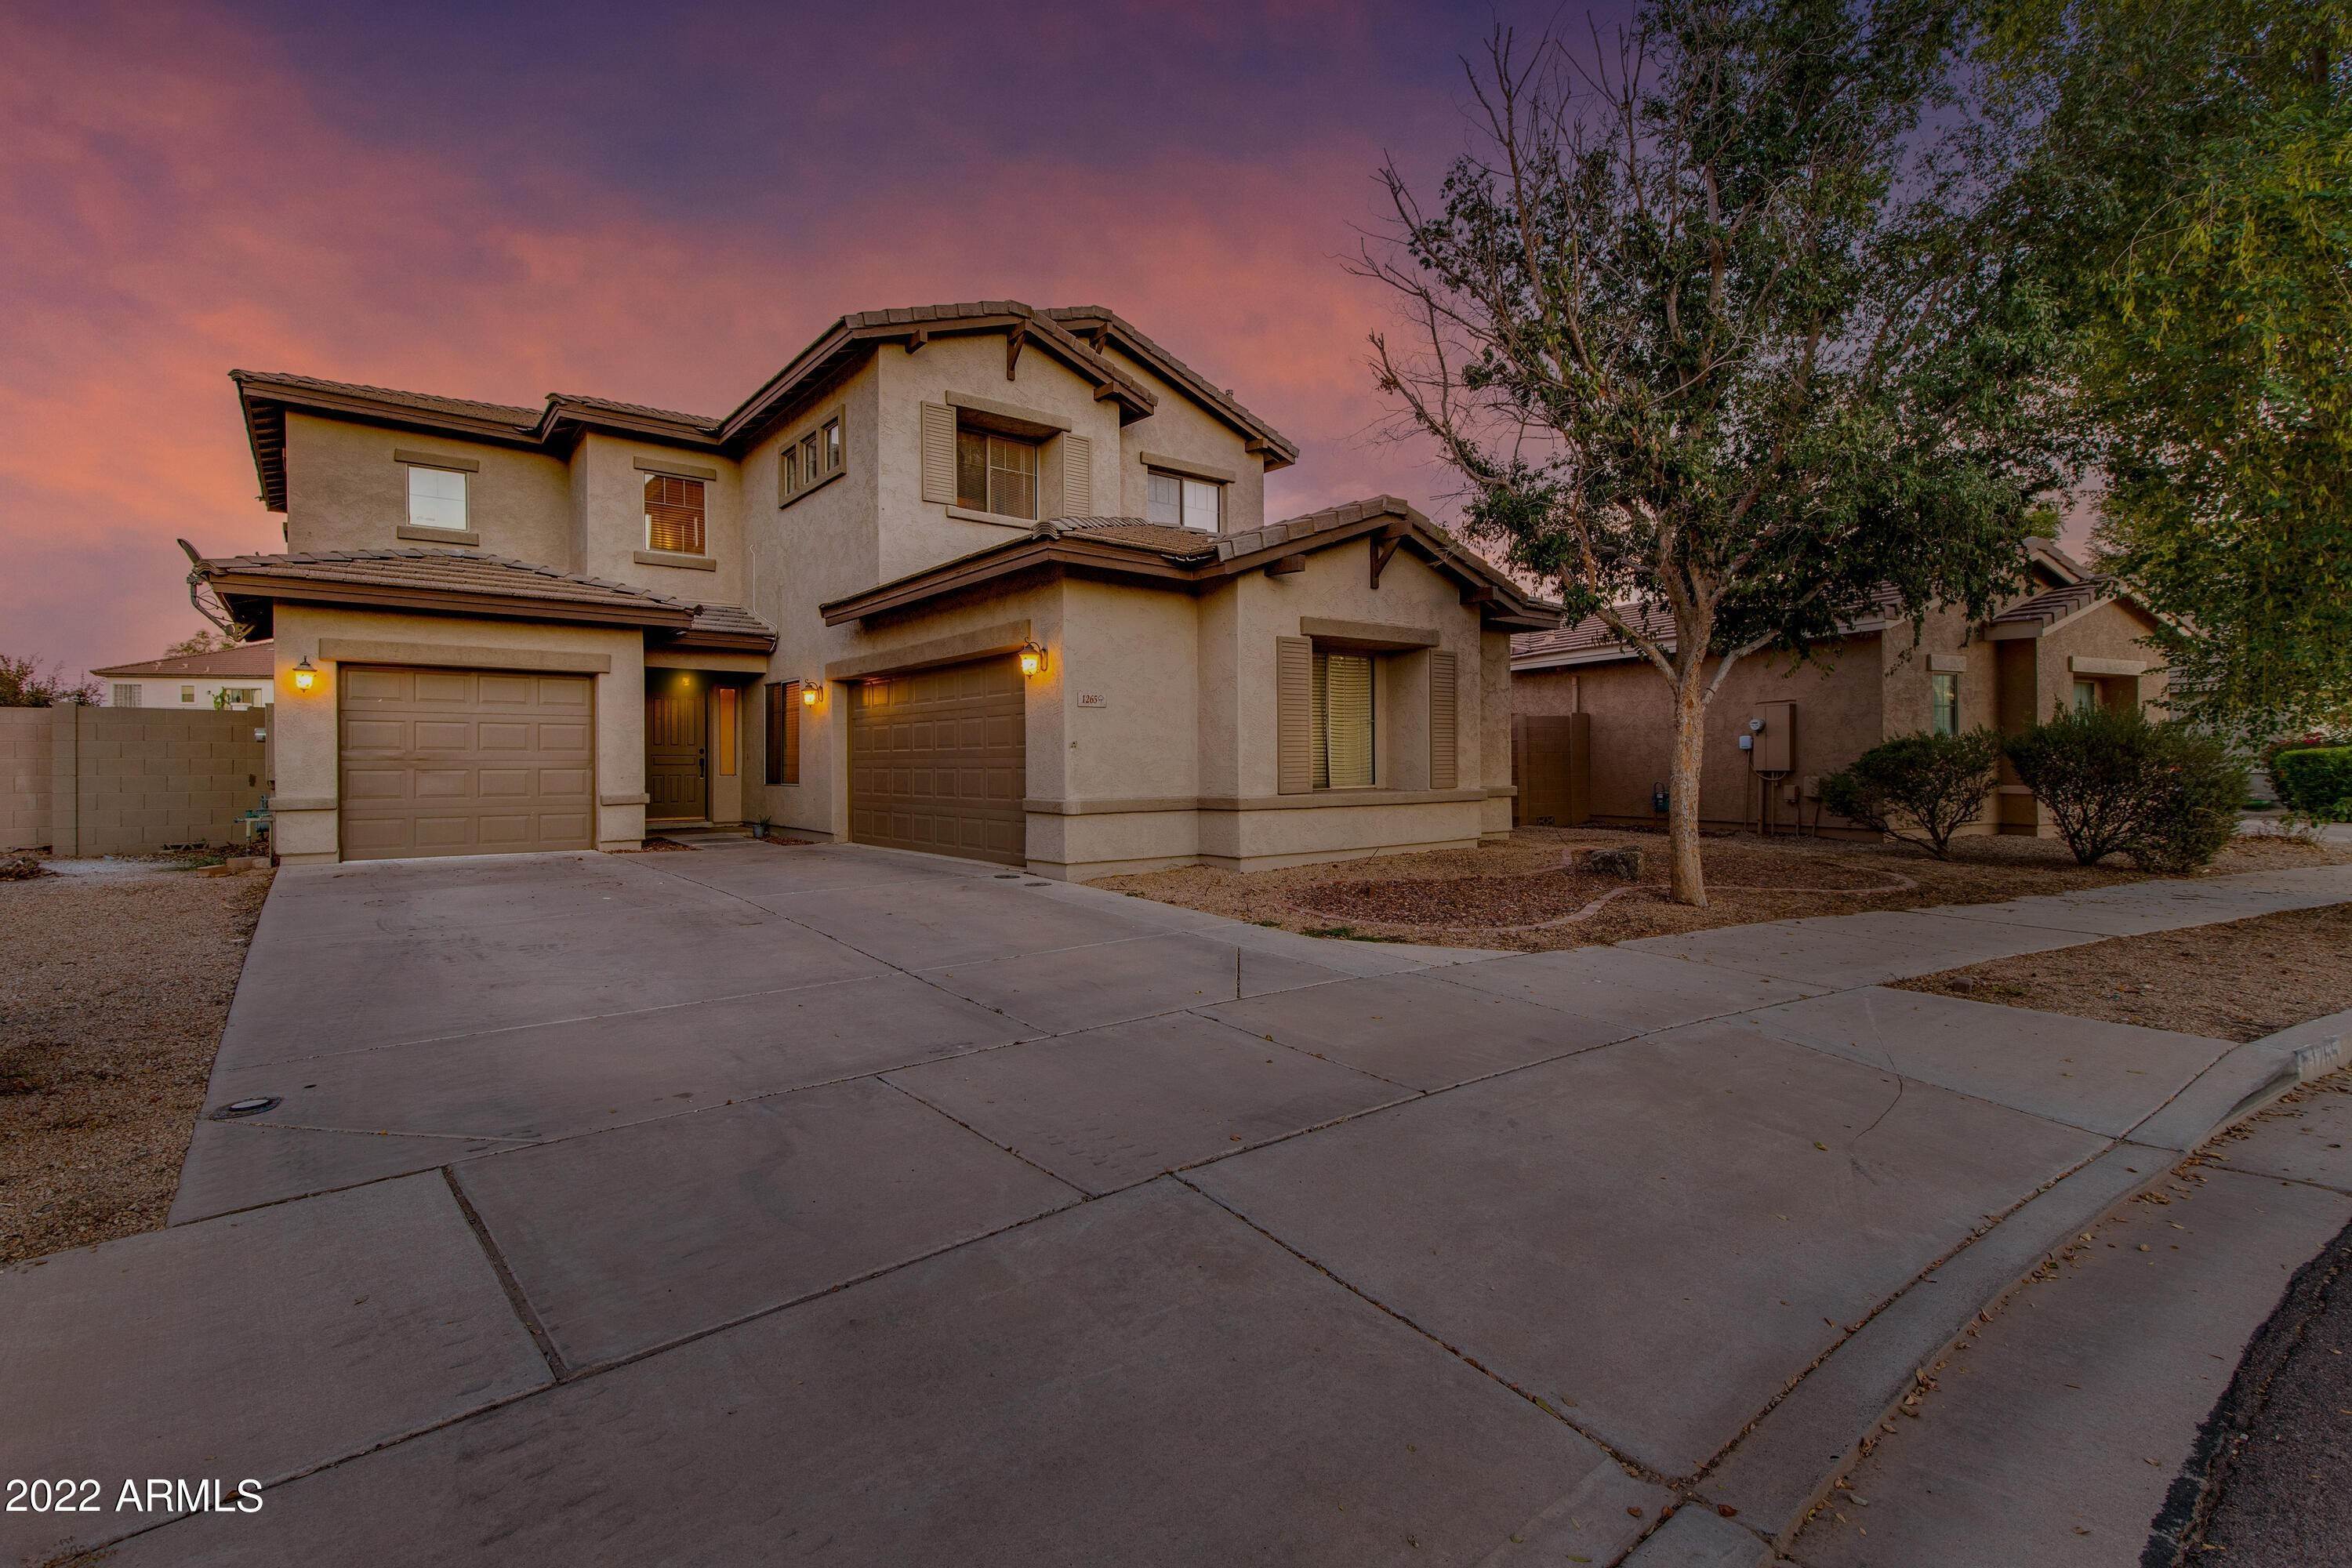 47. Single Family for Sale at Goodyear, AZ 85338